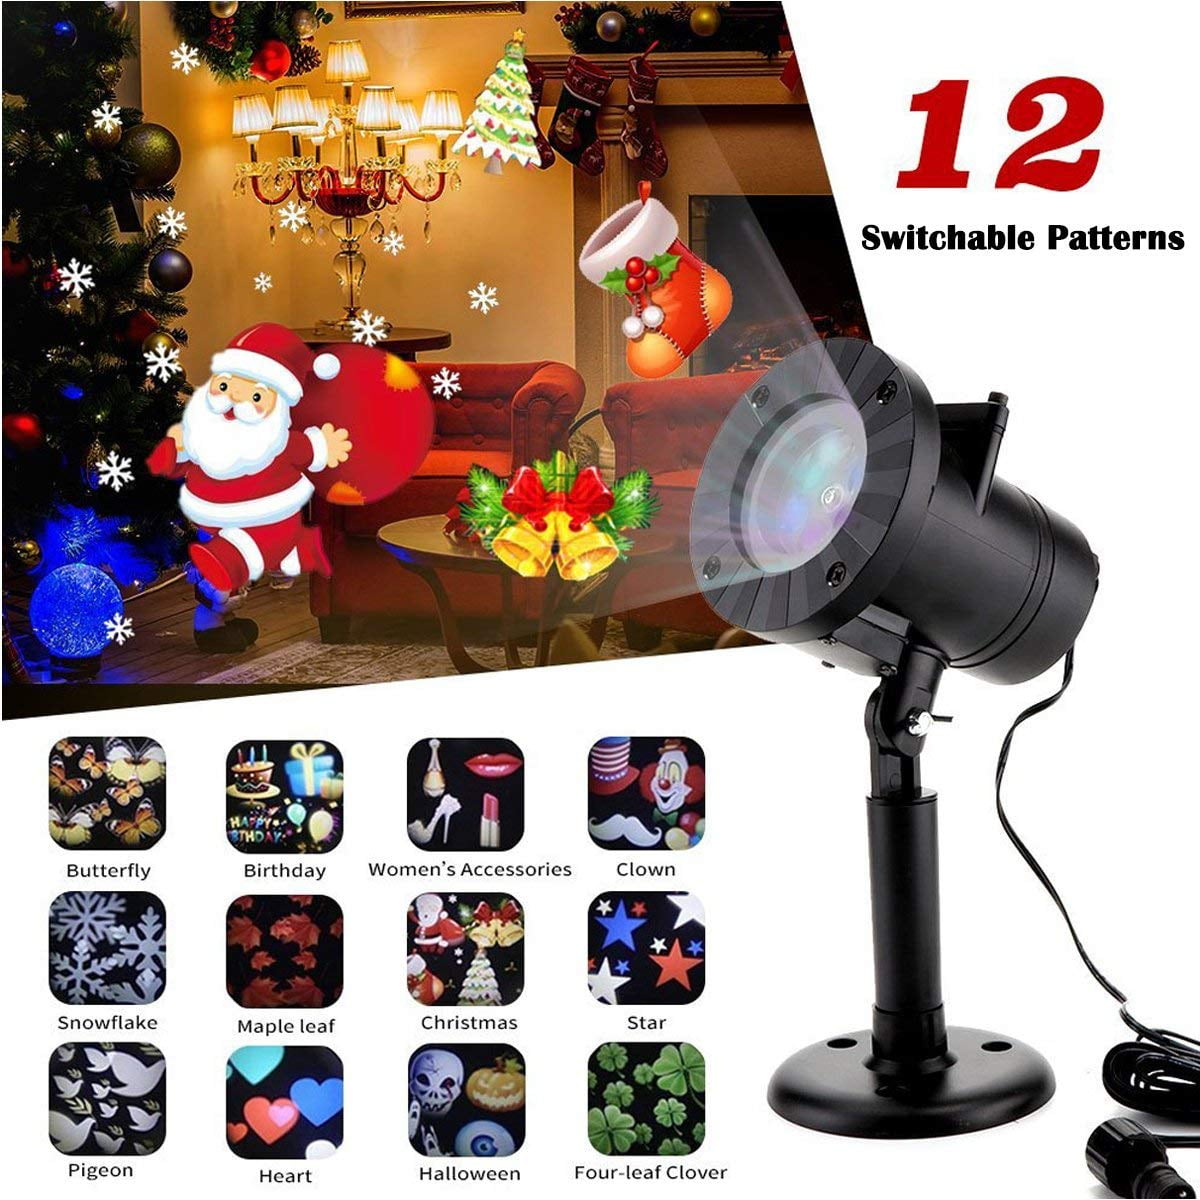 Details about   Outdoor Christmas Moving Laser Projector Lamp LED Light Decor Waterproof Remote 